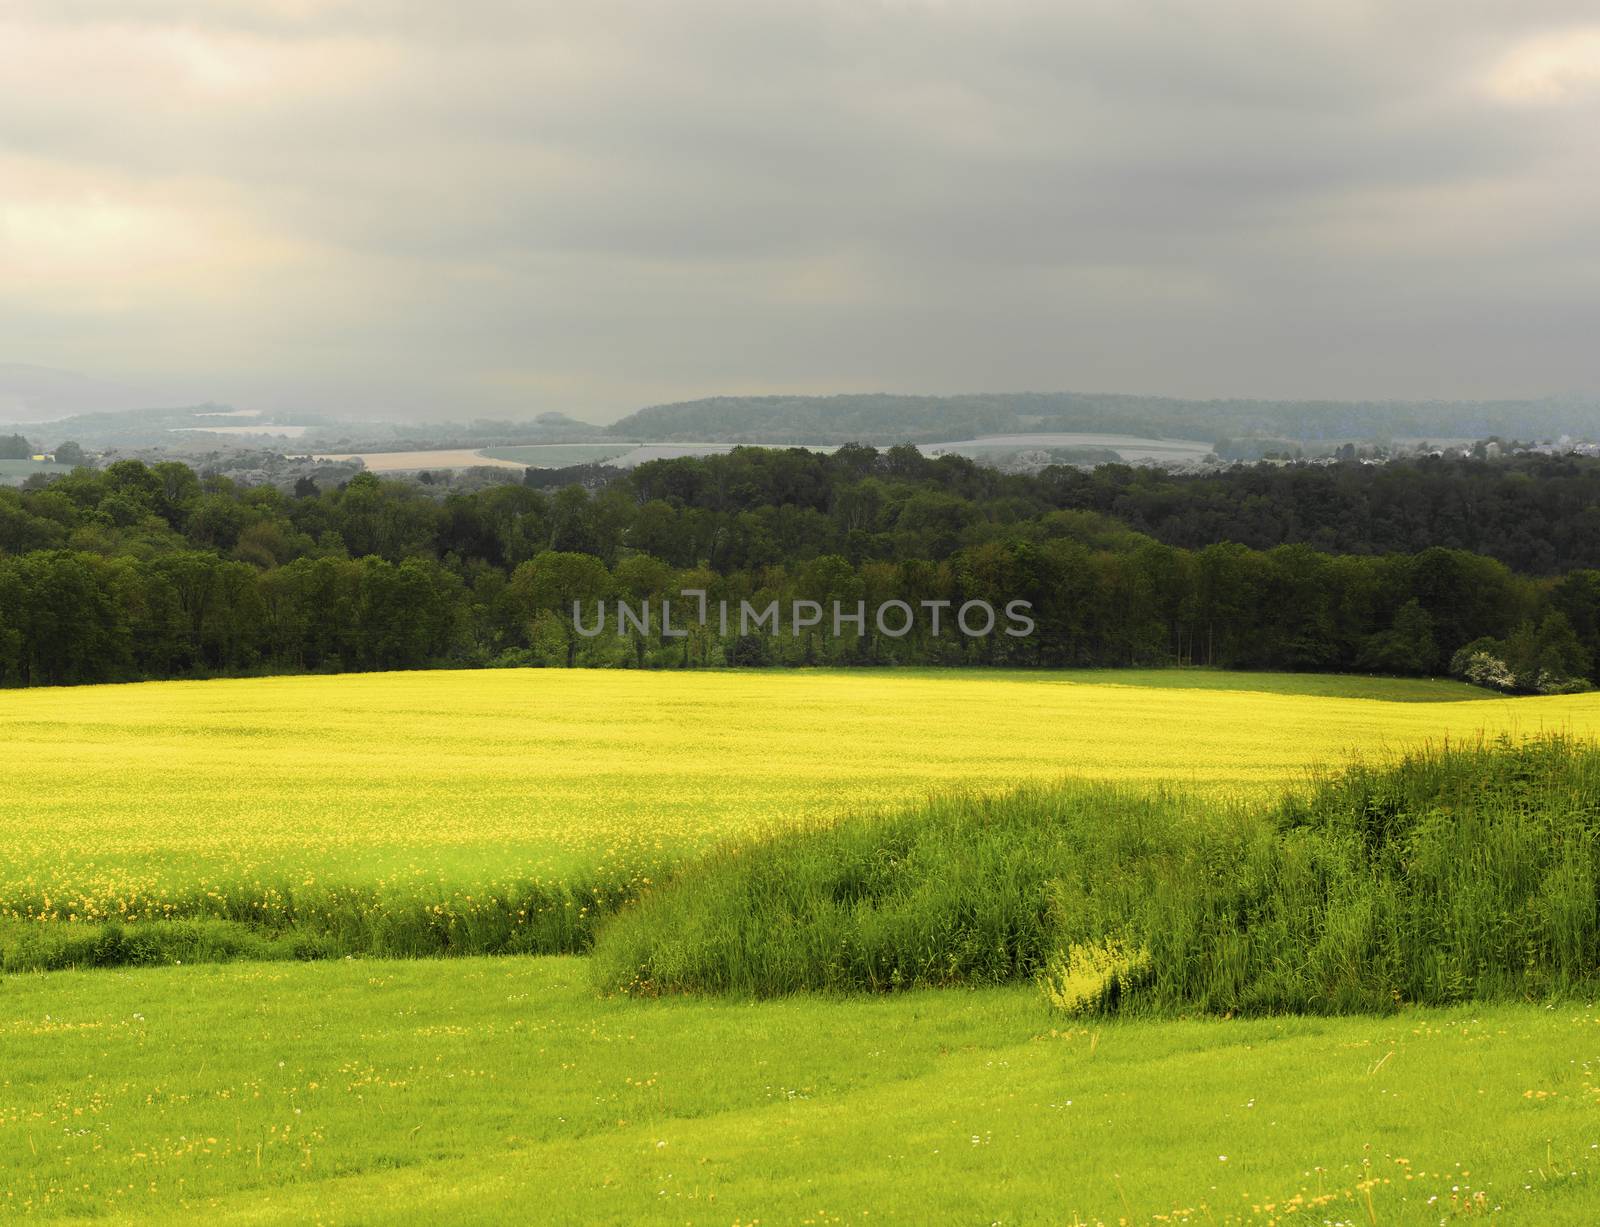 Belgium Rustic Landscape with Green Grass and Yellow Flowers Field against Dramatic Sky Outdoors